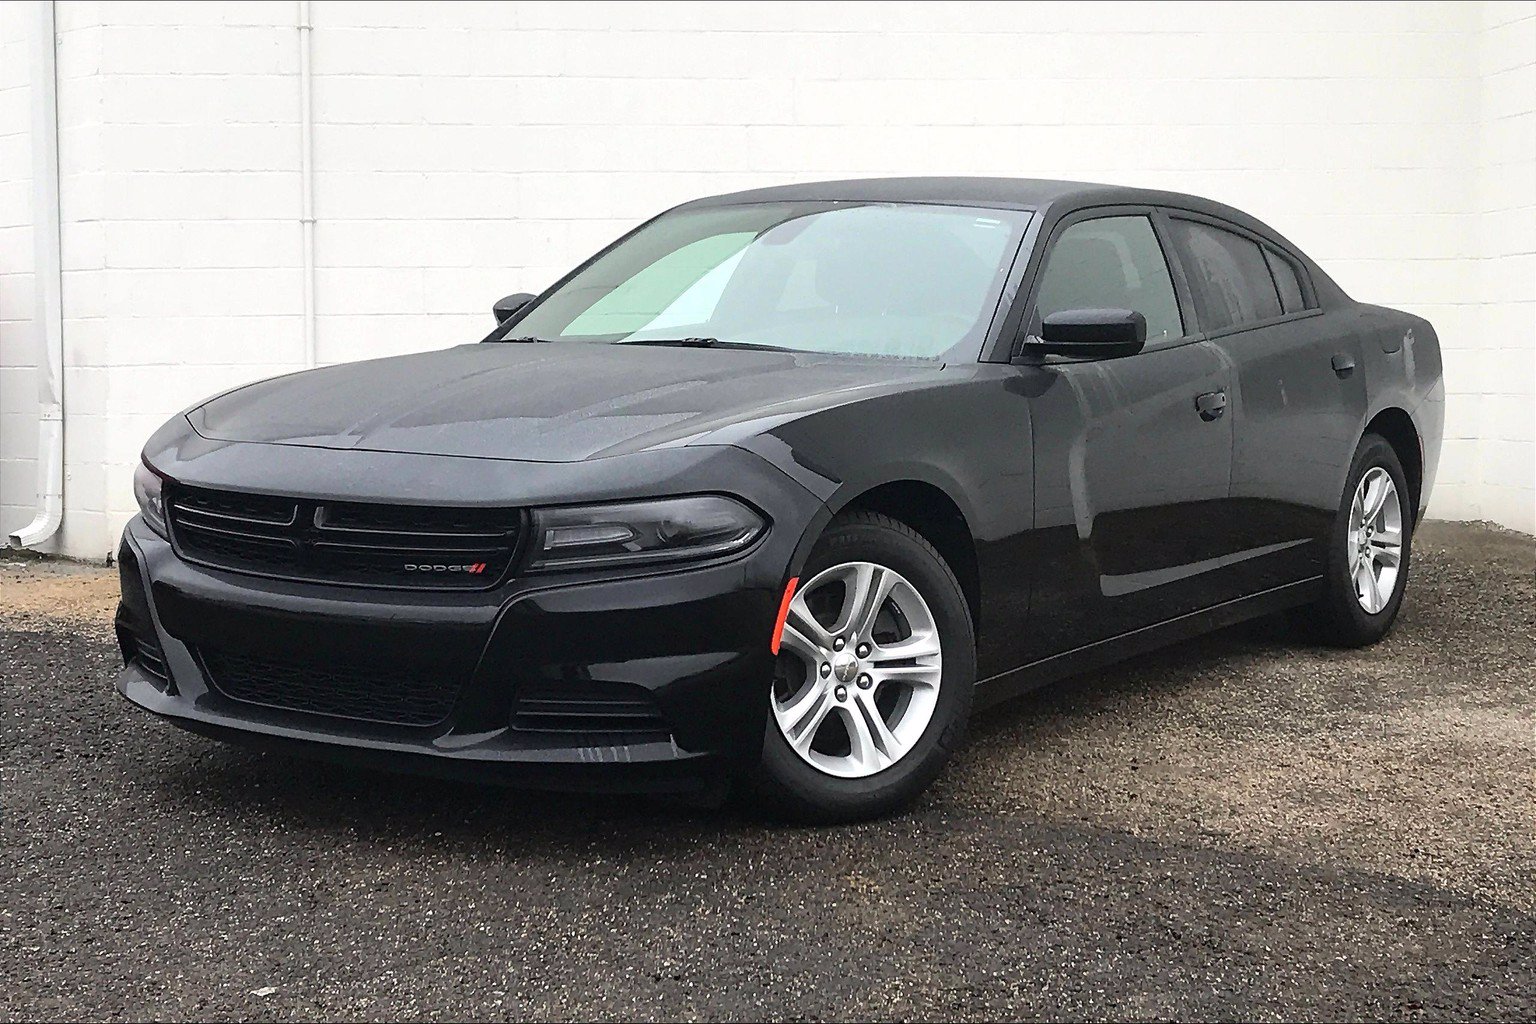 Pre-Owned 2019 Dodge Charger SXT 4D Sedan in Morton #563952 | Mike